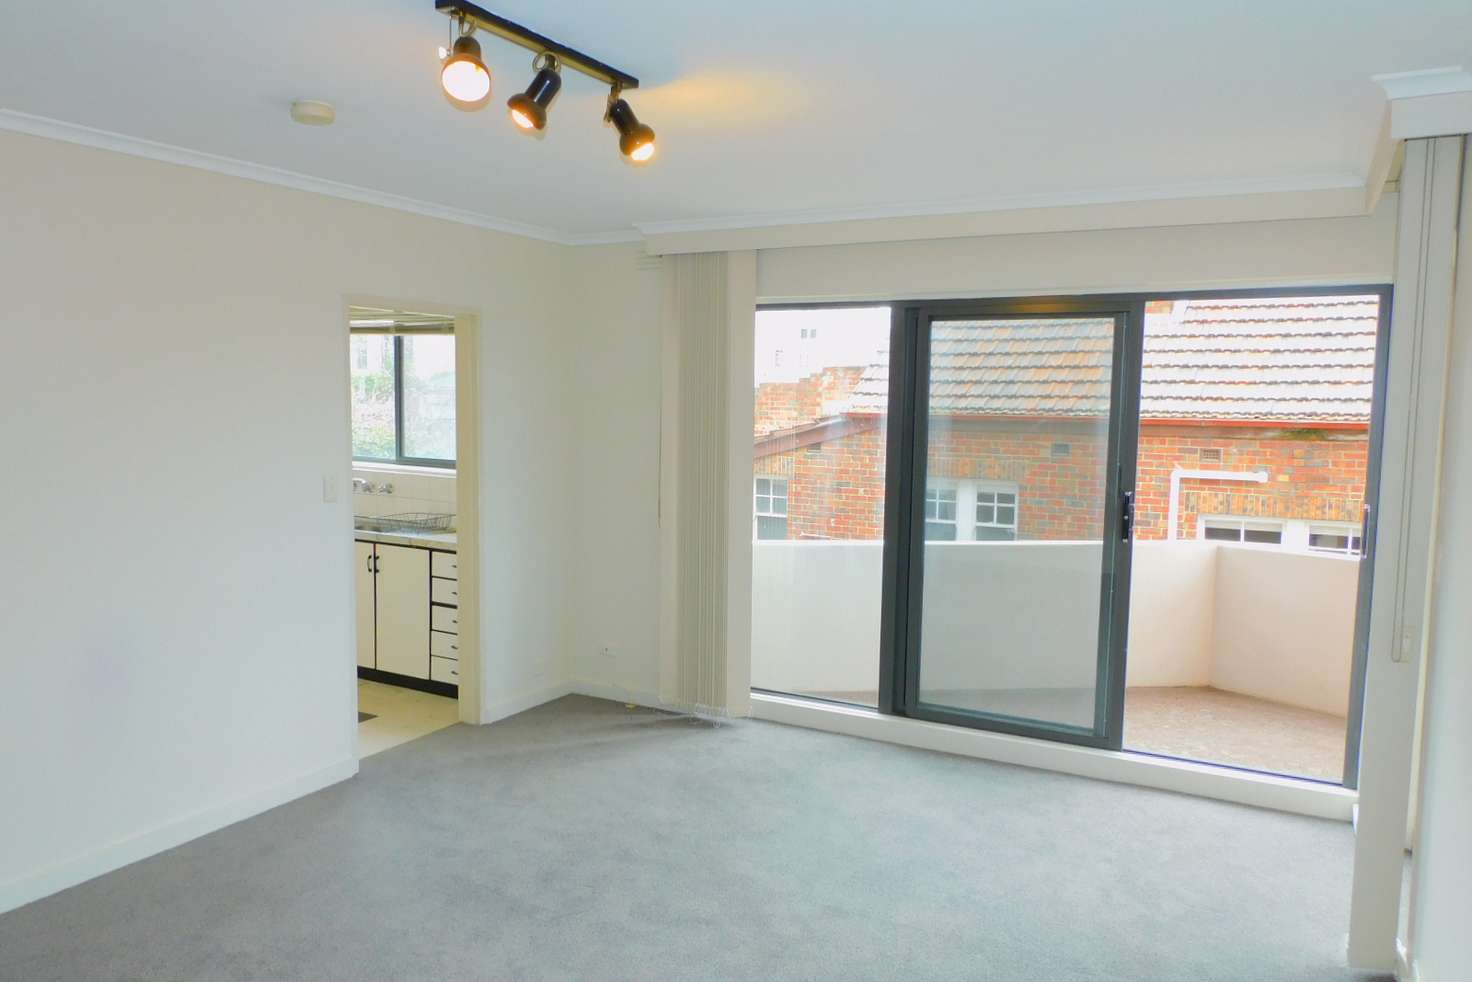 Main view of Homely apartment listing, 4/19 McIlwraith Str., Parkville VIC 3052